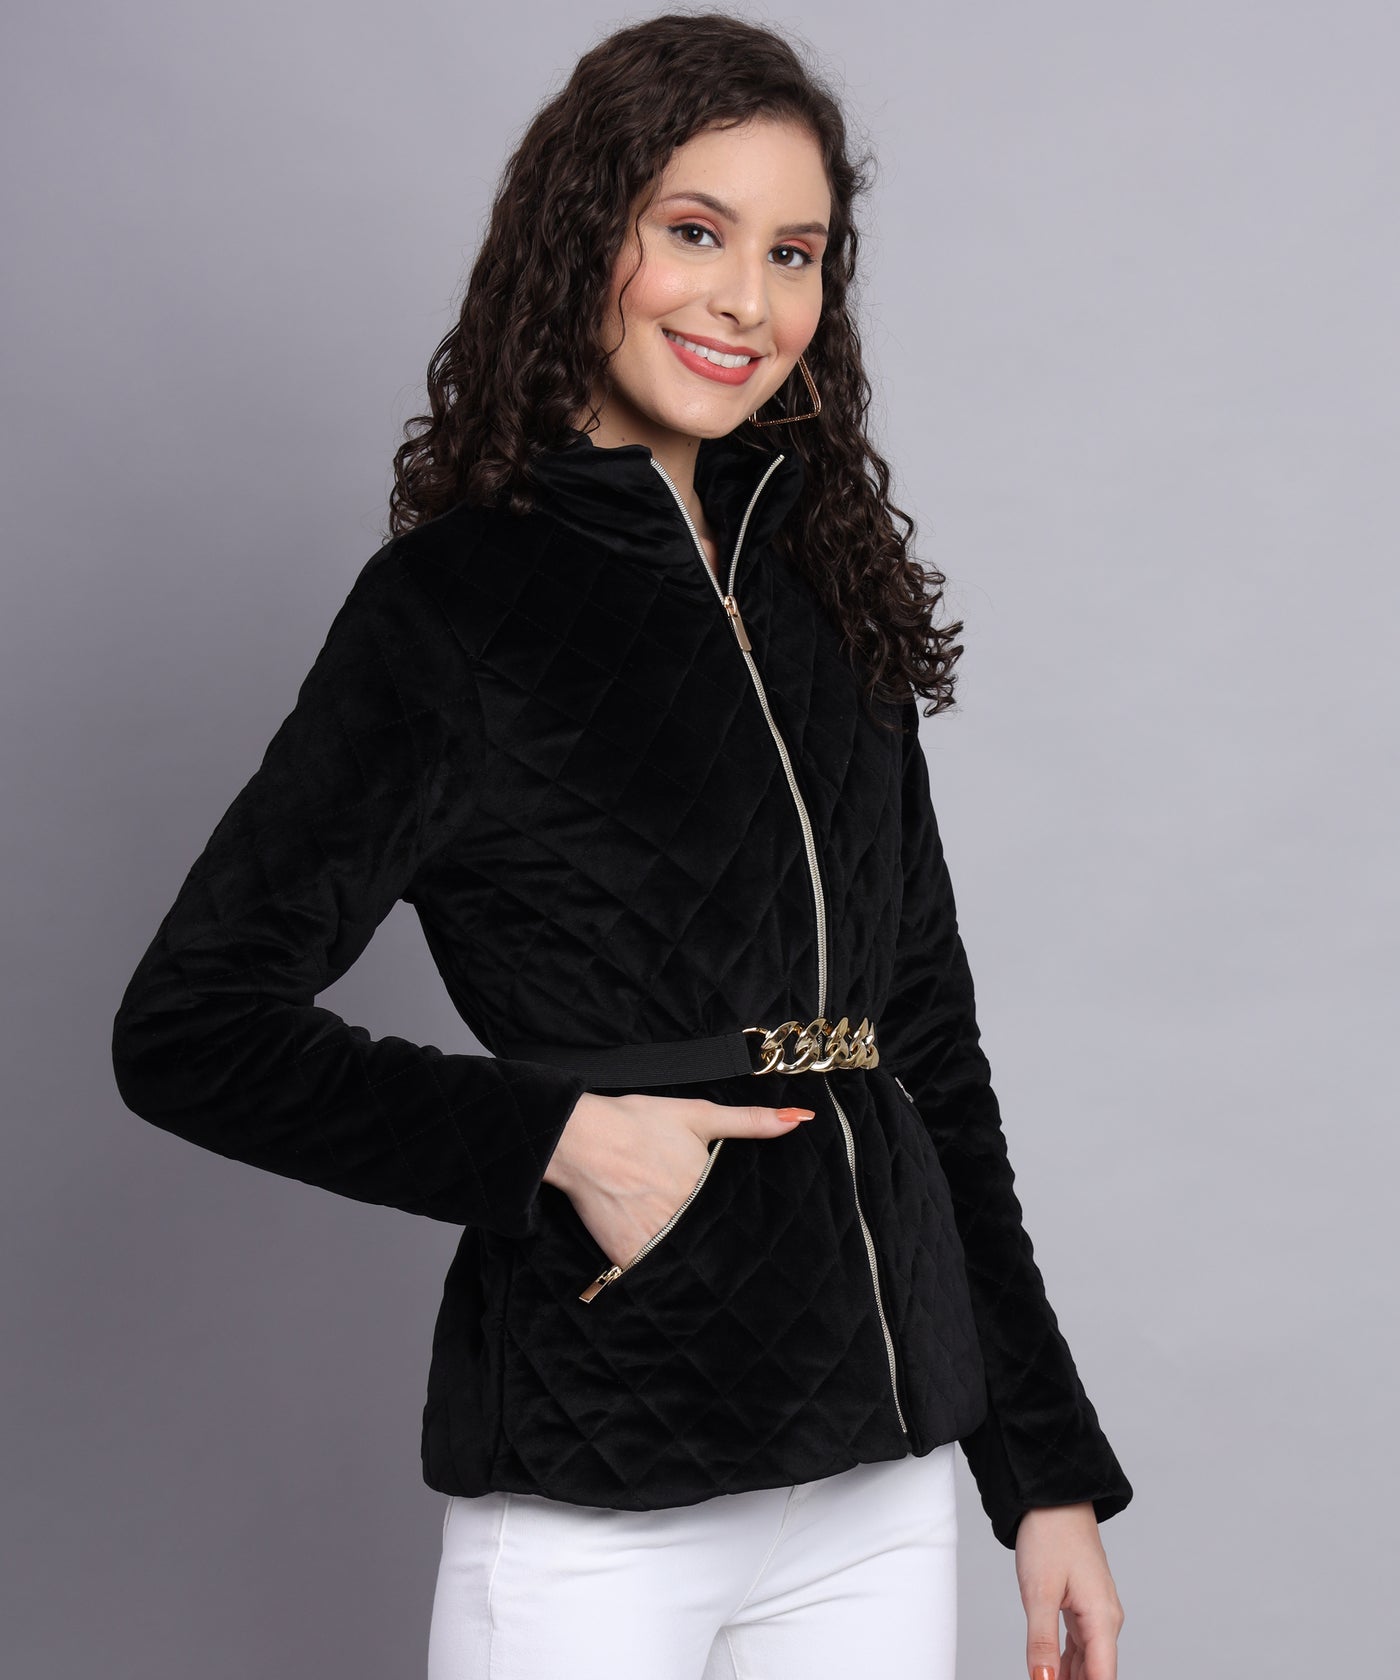 Black diamond quilted jacket - Aw6112